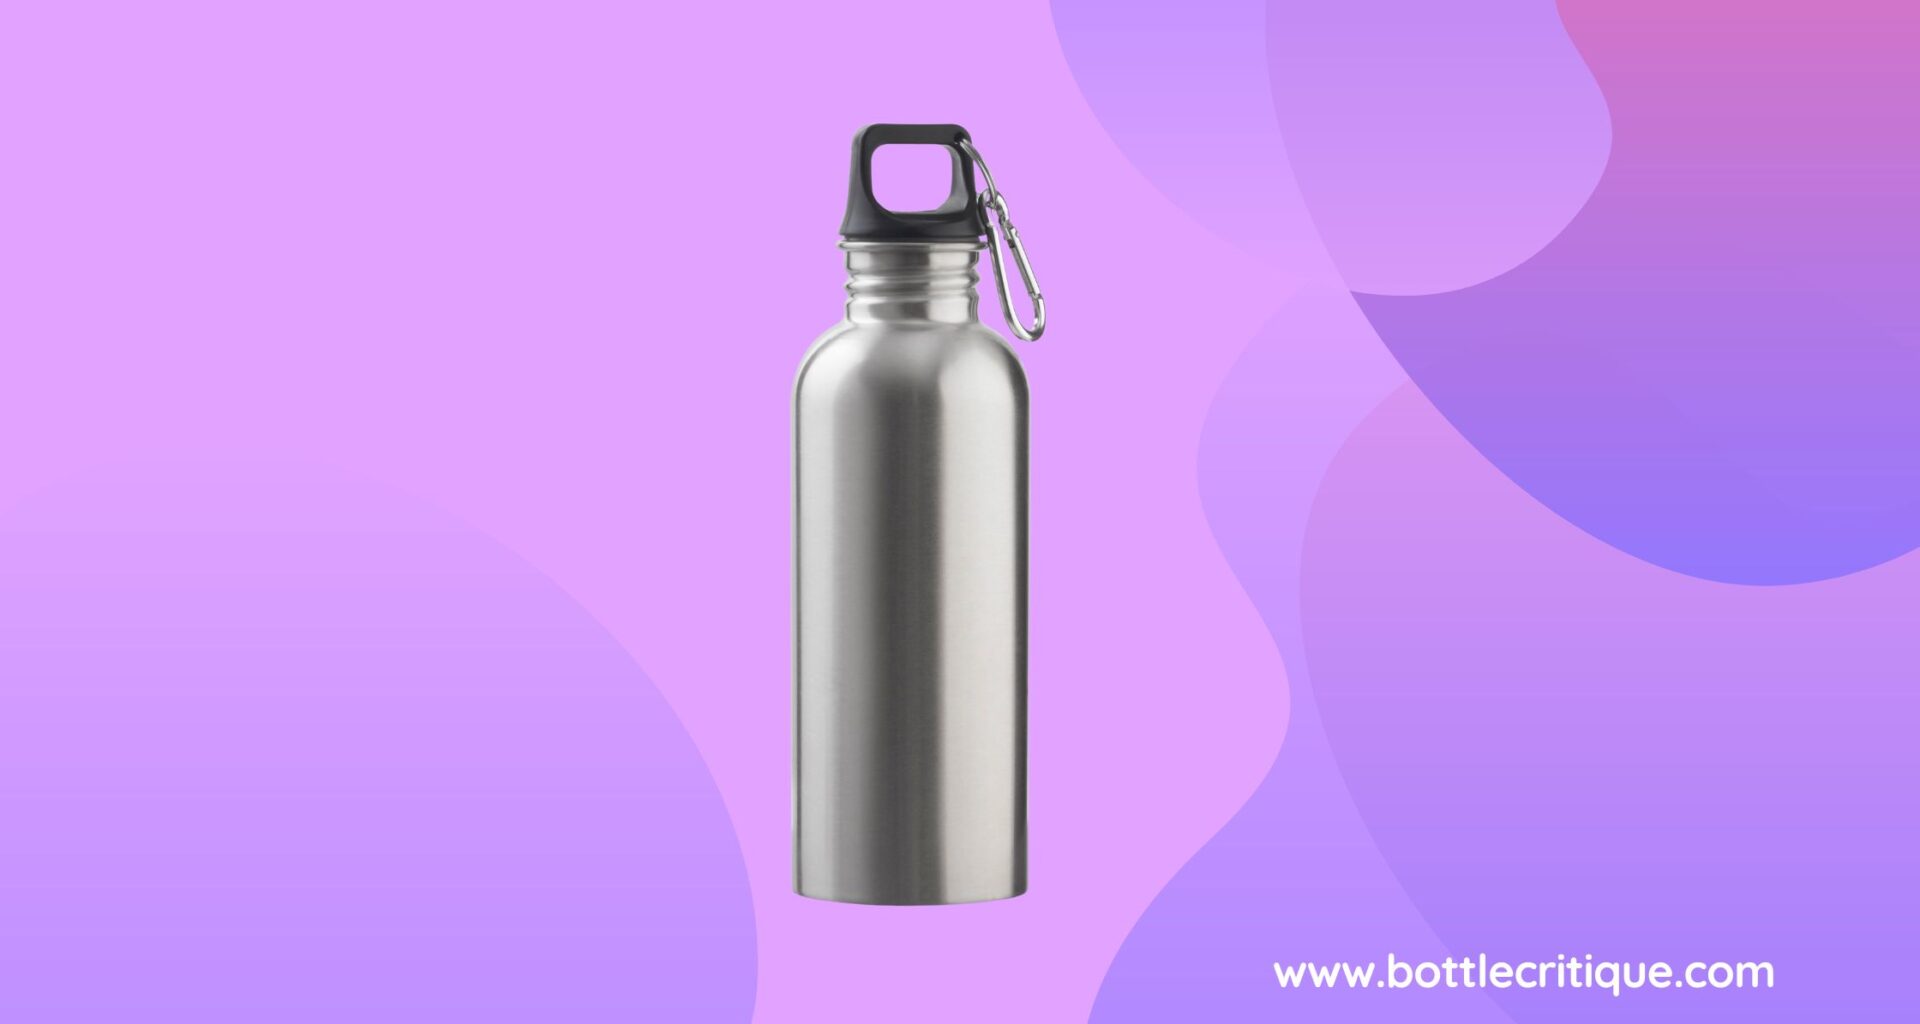 How to Sanitize Stainless Steel Water Bottle?